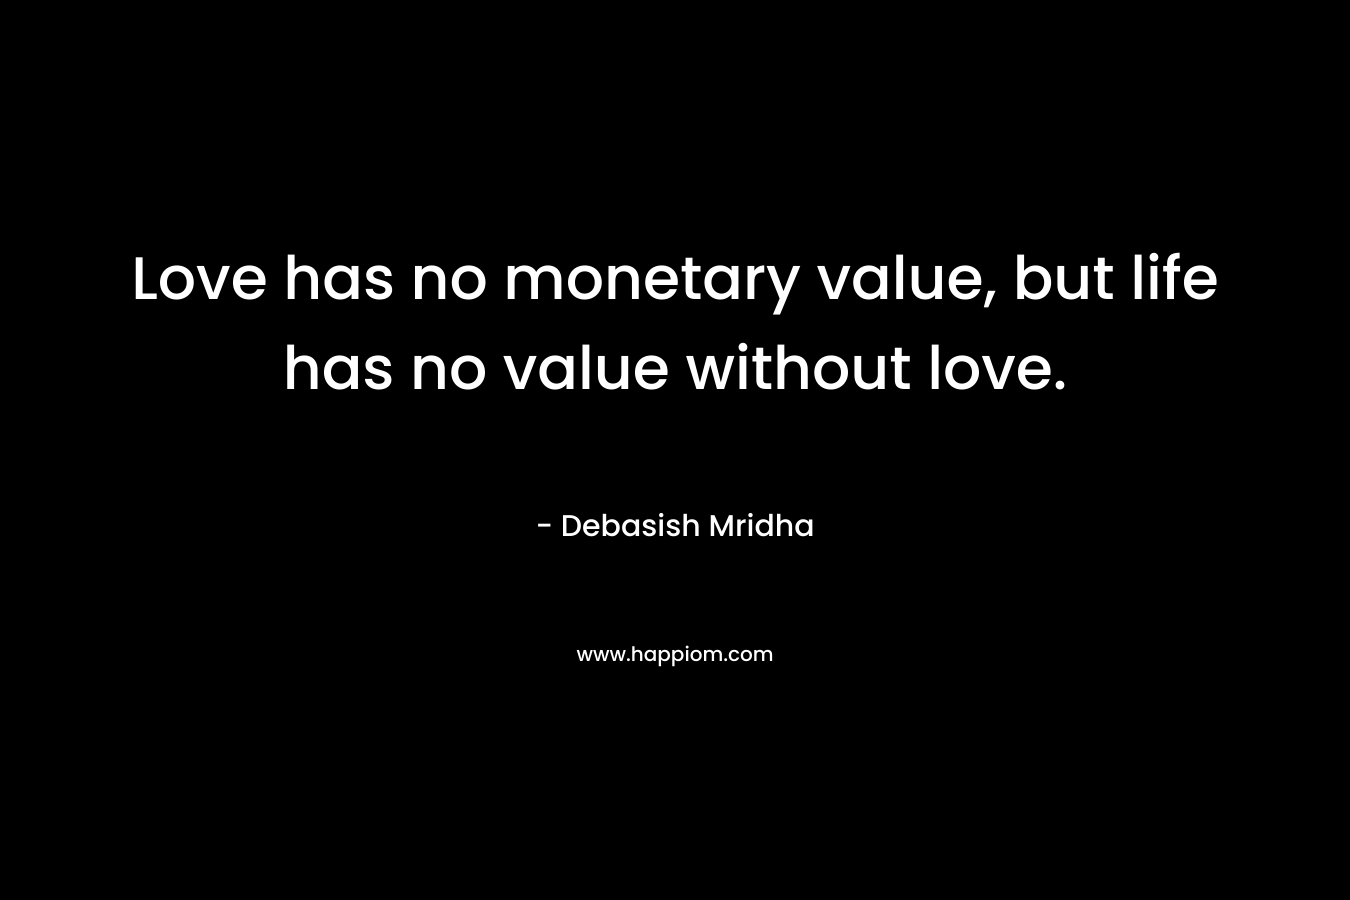 Love has no monetary value, but life has no value without love.